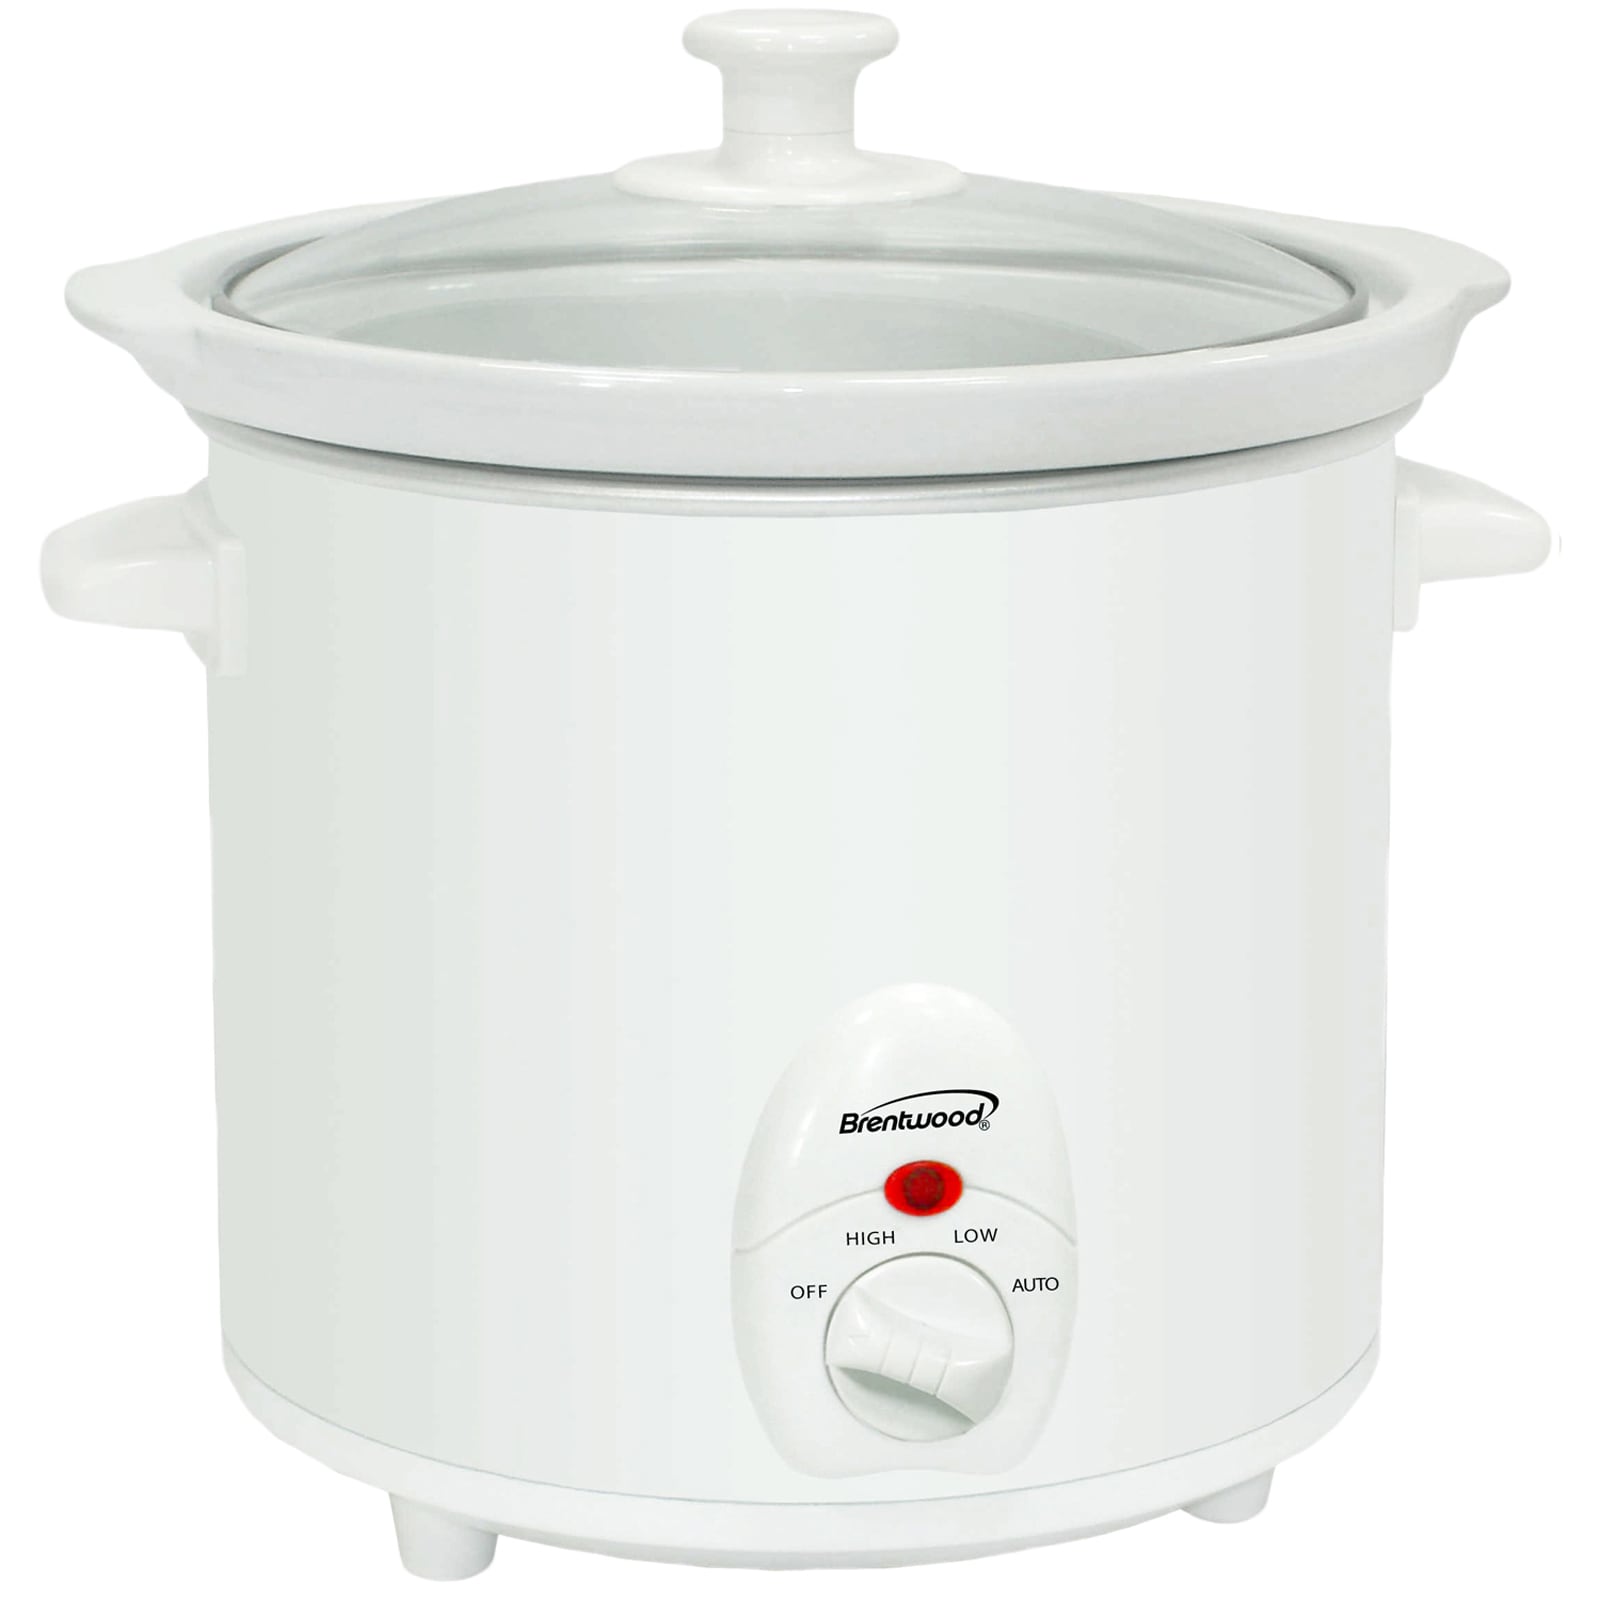 brentwood 3-Quart White Oval Slow Cooker